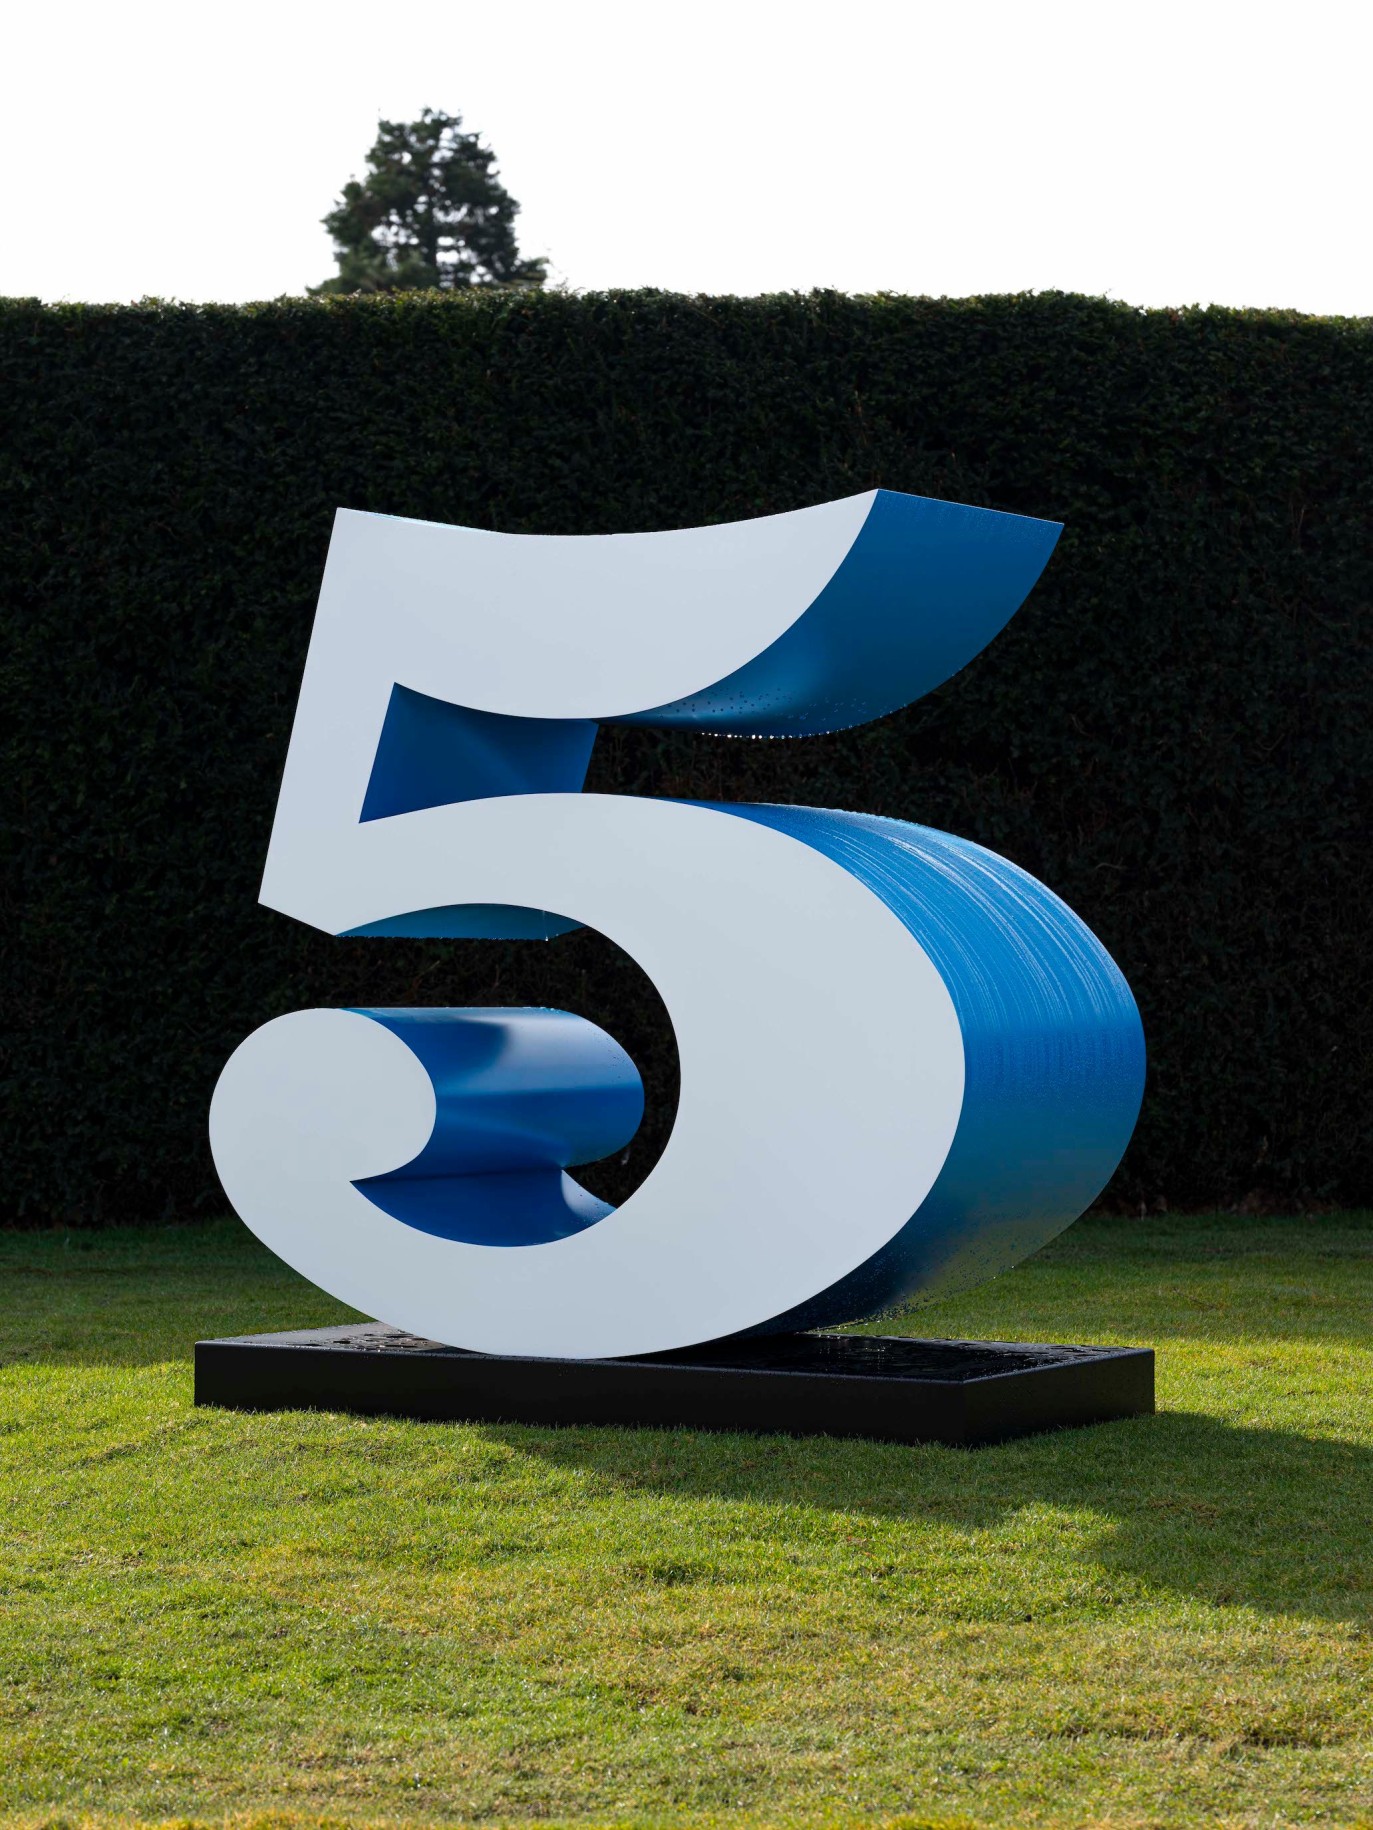 Installation view of Indiana's white and blue polychrome aluminum sculpture of the number FIVE at the Yorkshire Sculpture Park